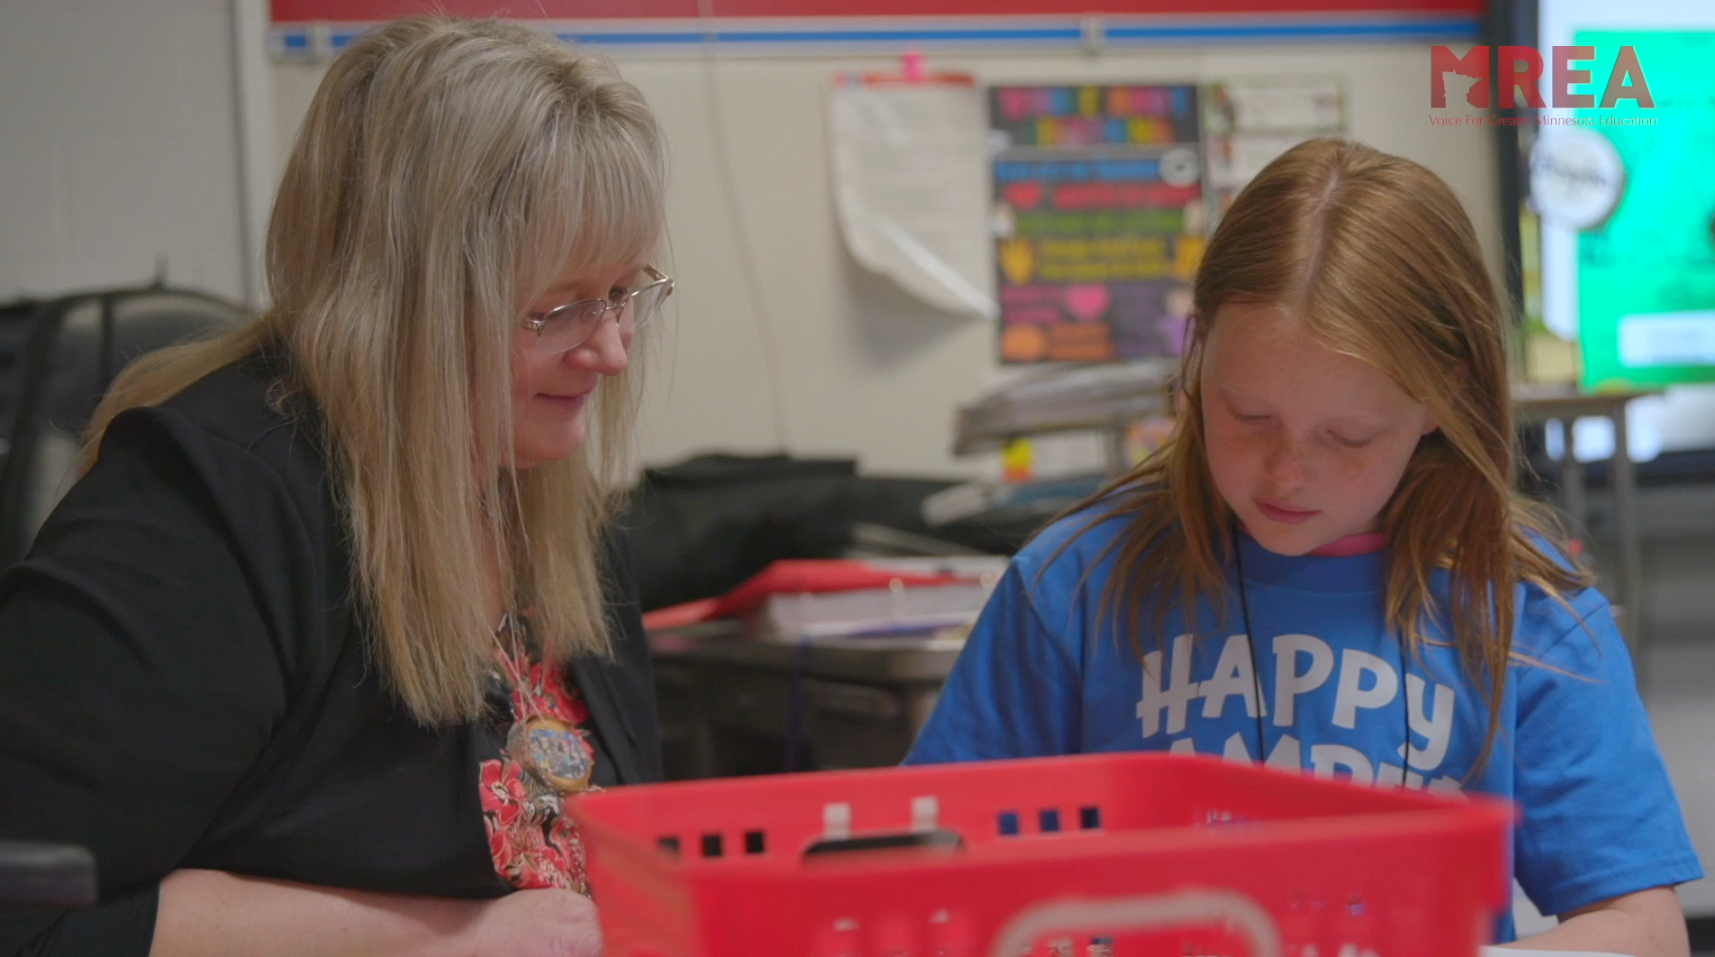 Angie Hurtig Gives Students a Learning Experience